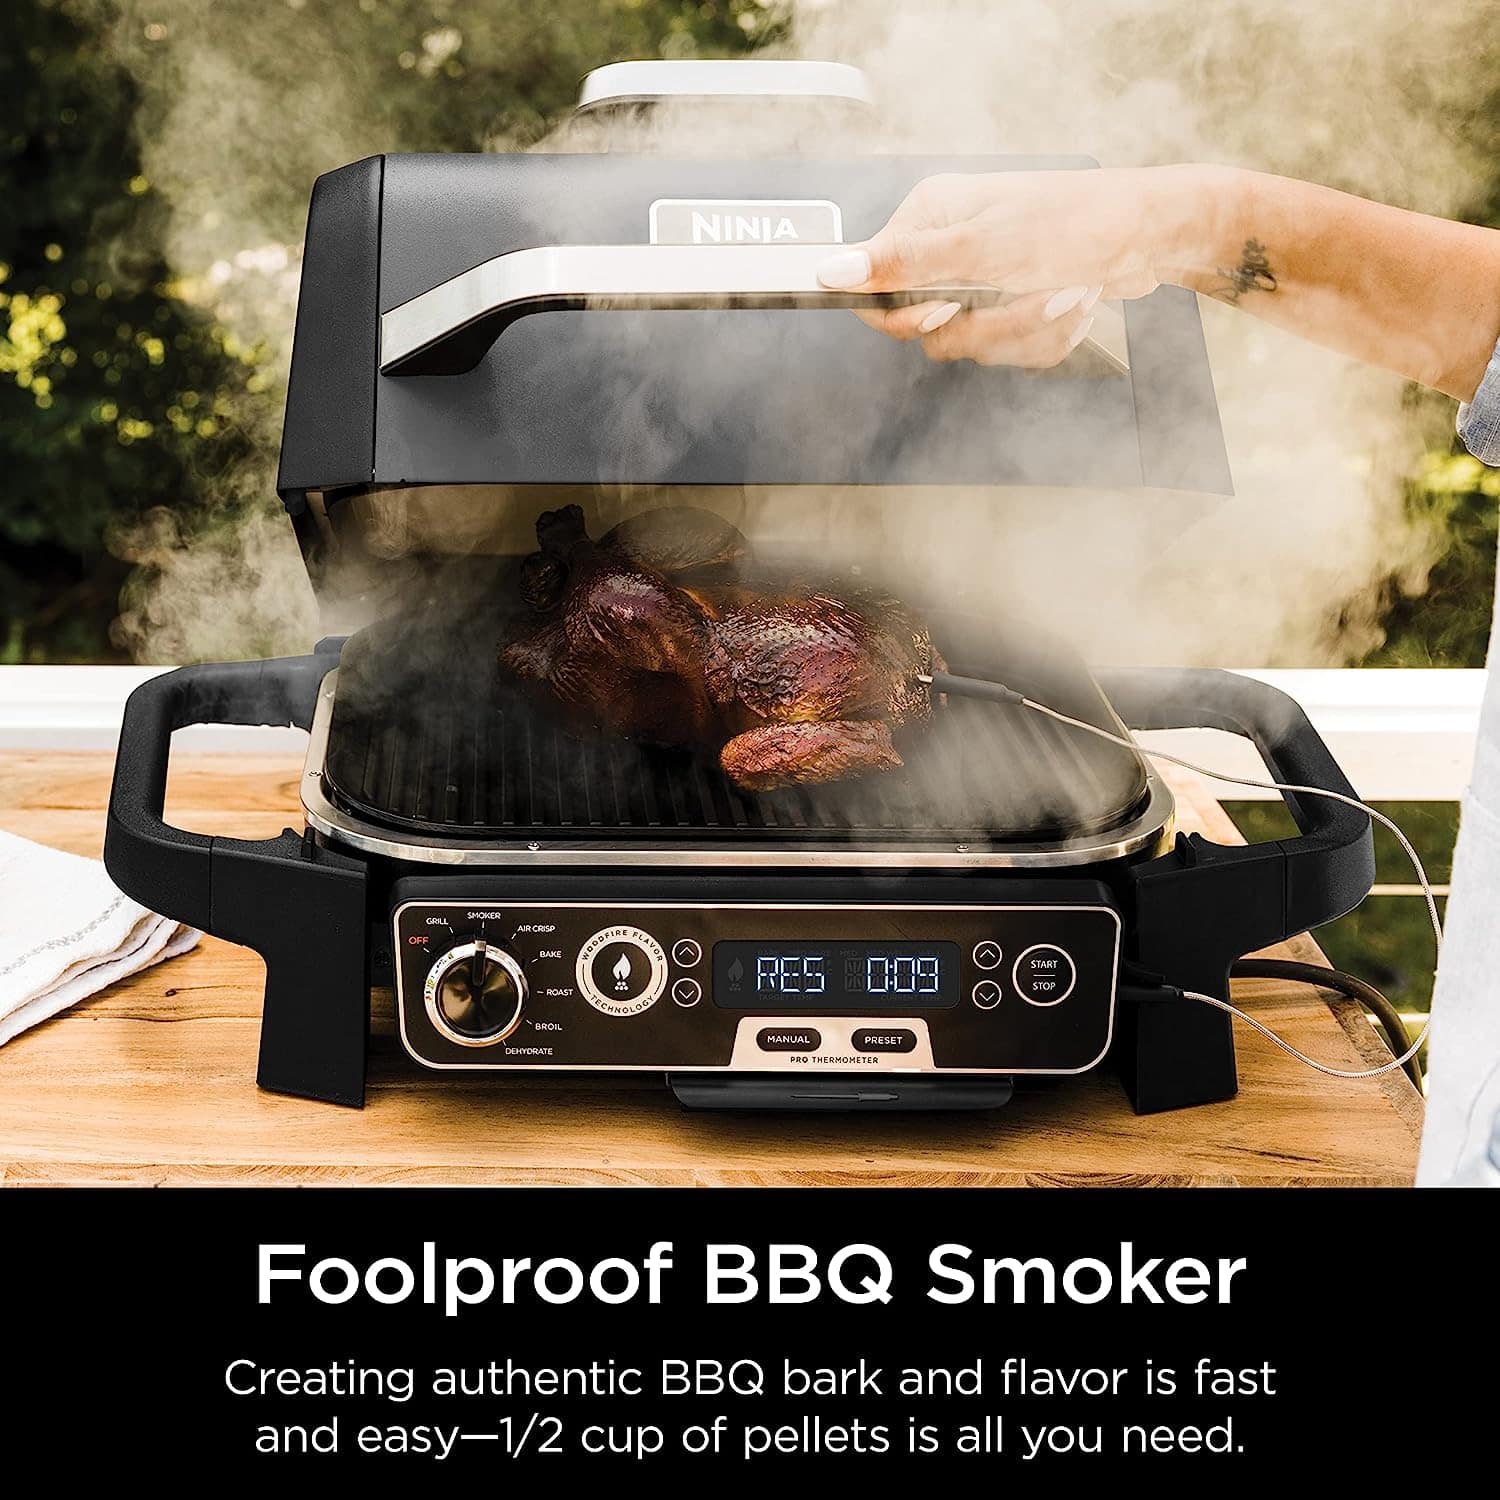 Looking for an outdoor grill & smoker? Check out our review of the